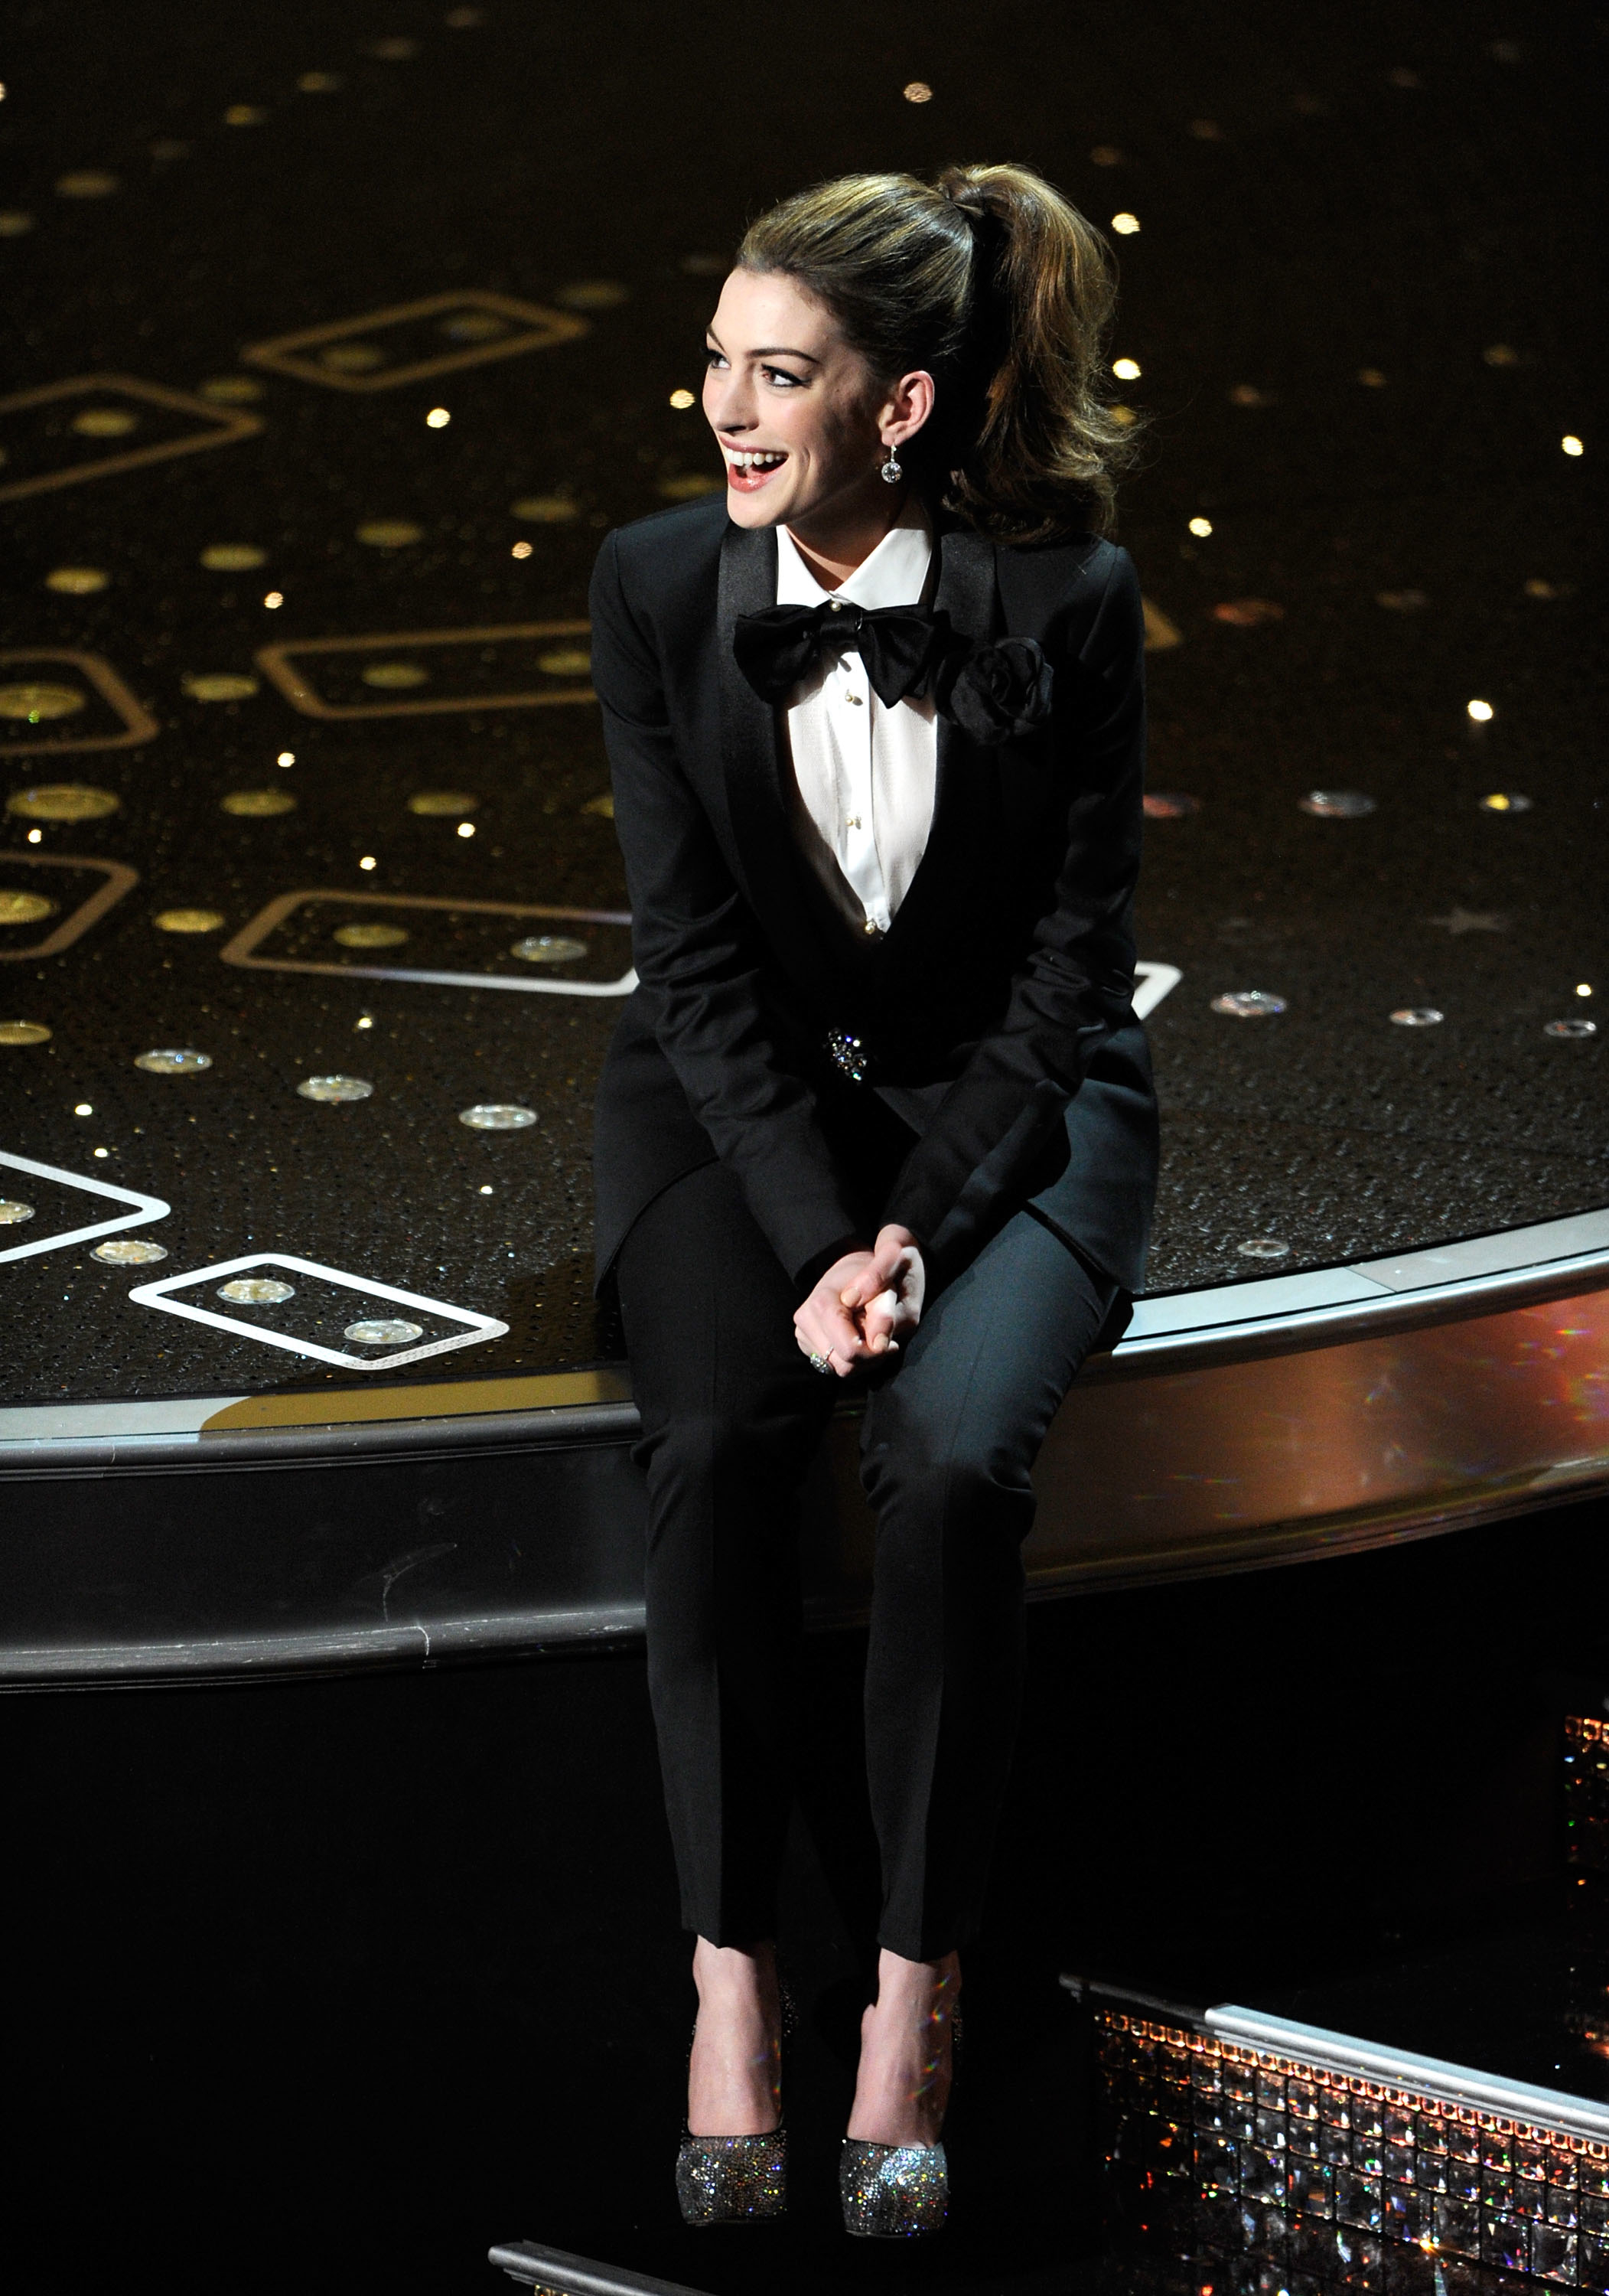 Anne Hathaway in a black tuxedo with bow tie and sparkling shoes sitting on stage while hosting the Oscars